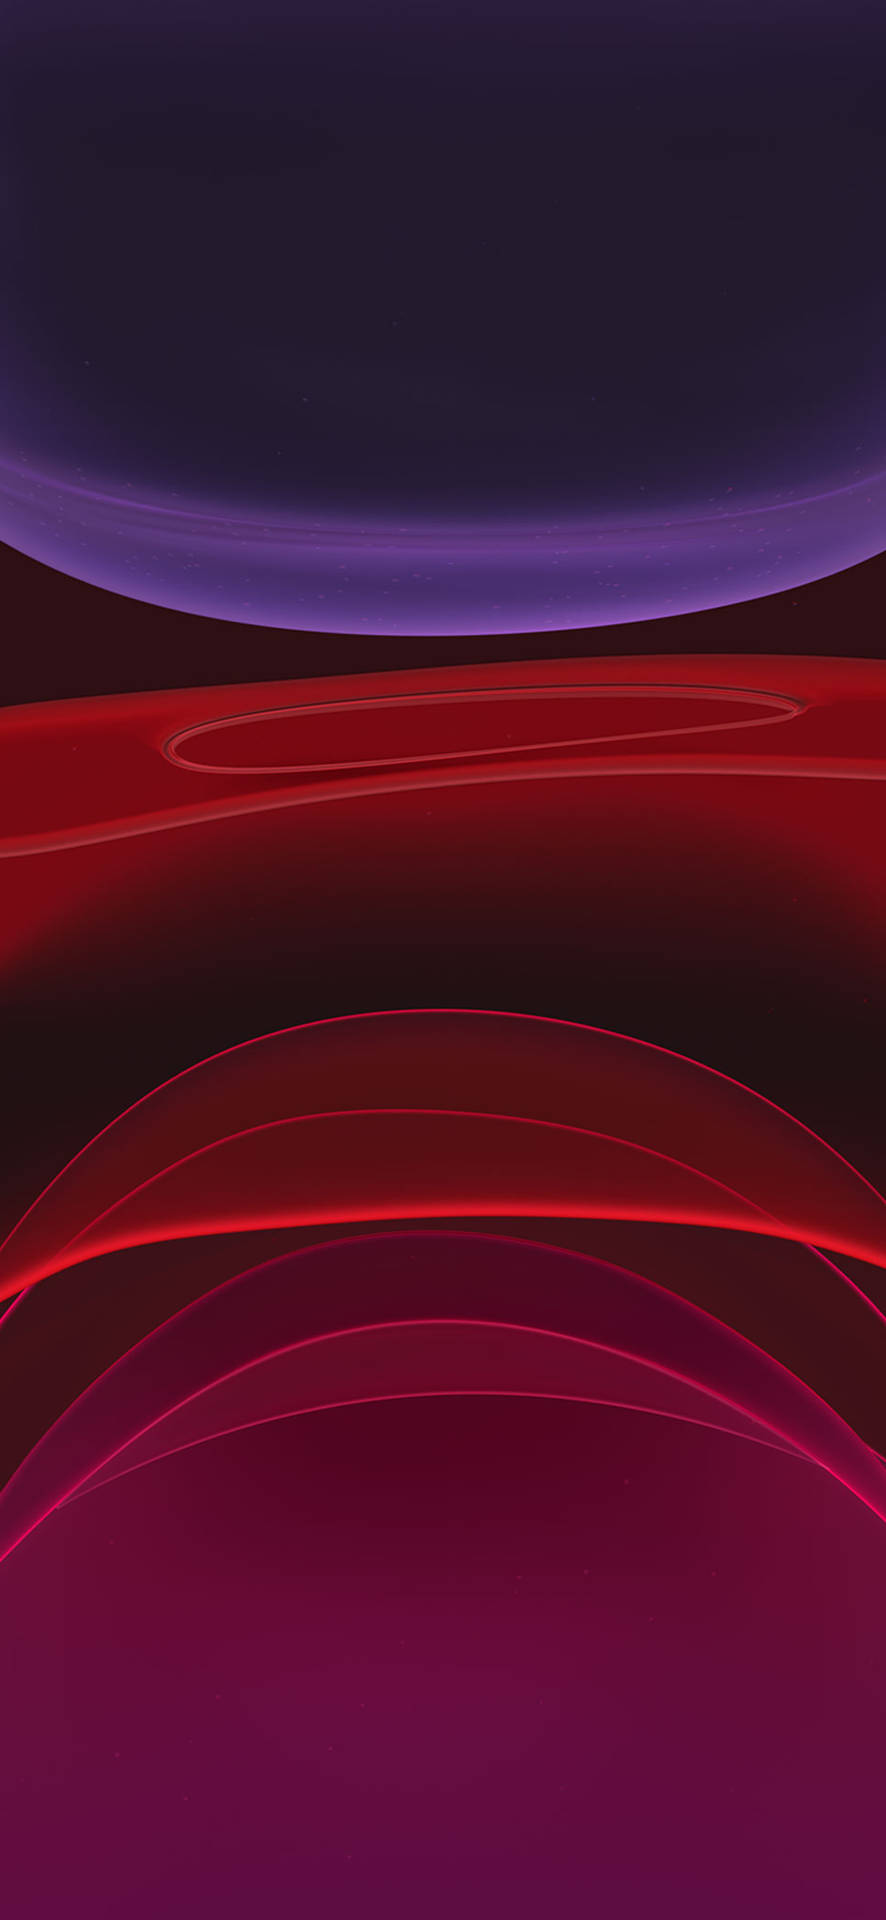 Iphone 11 Pro Red And Purple Circles Wallpaper